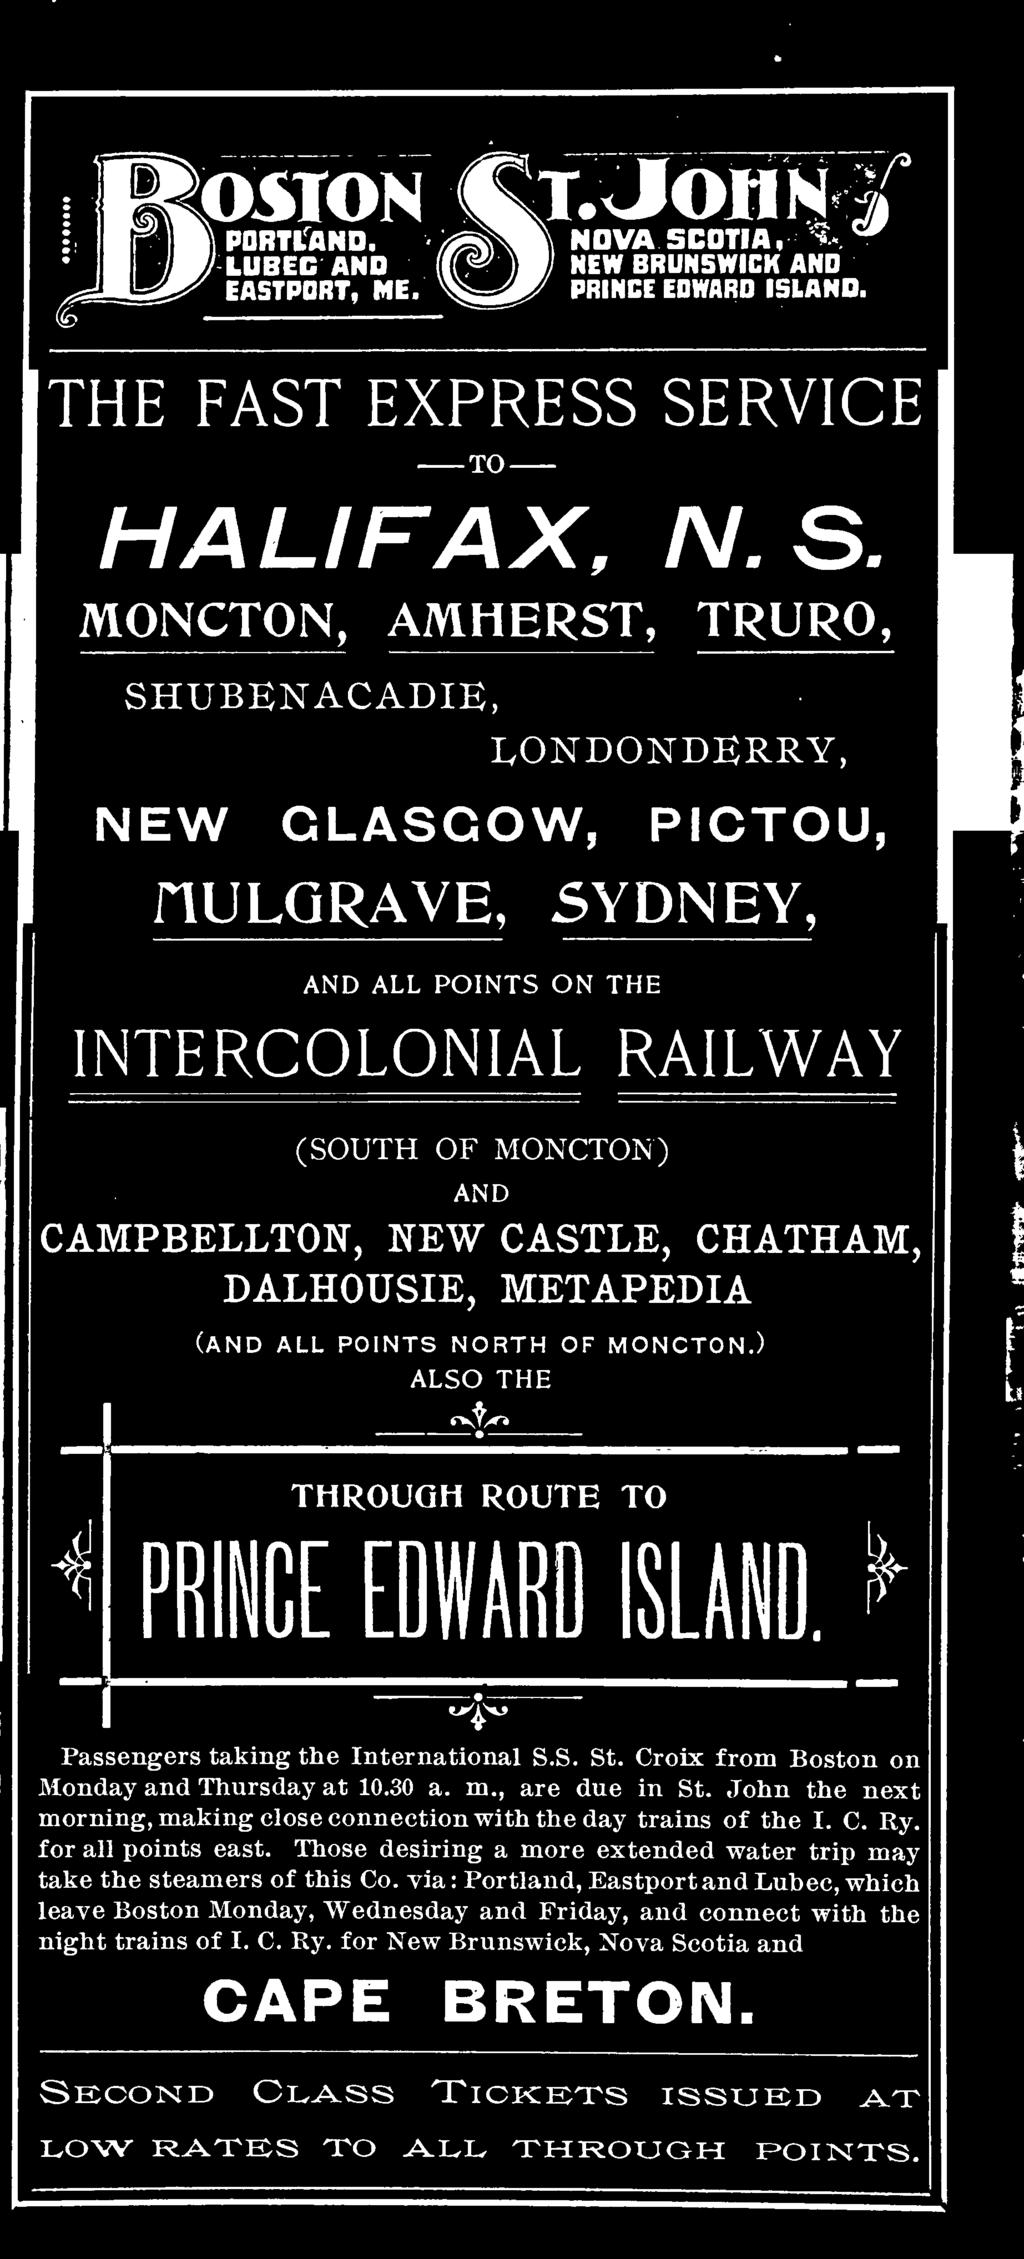 SERVICE TO HALIFAX, N.S. MONCTON, AMHERST, TRURO, SHUBENACADIE, LONDONDERRY, NEW GLASGOW, HULGRAVE, SYDNEY, PICTOU, AND ALL POINTS ON THE INTERCOLONIAL RAILWAY (SOUTH OF MONCTON) AND CAMPBELLTON, NEW